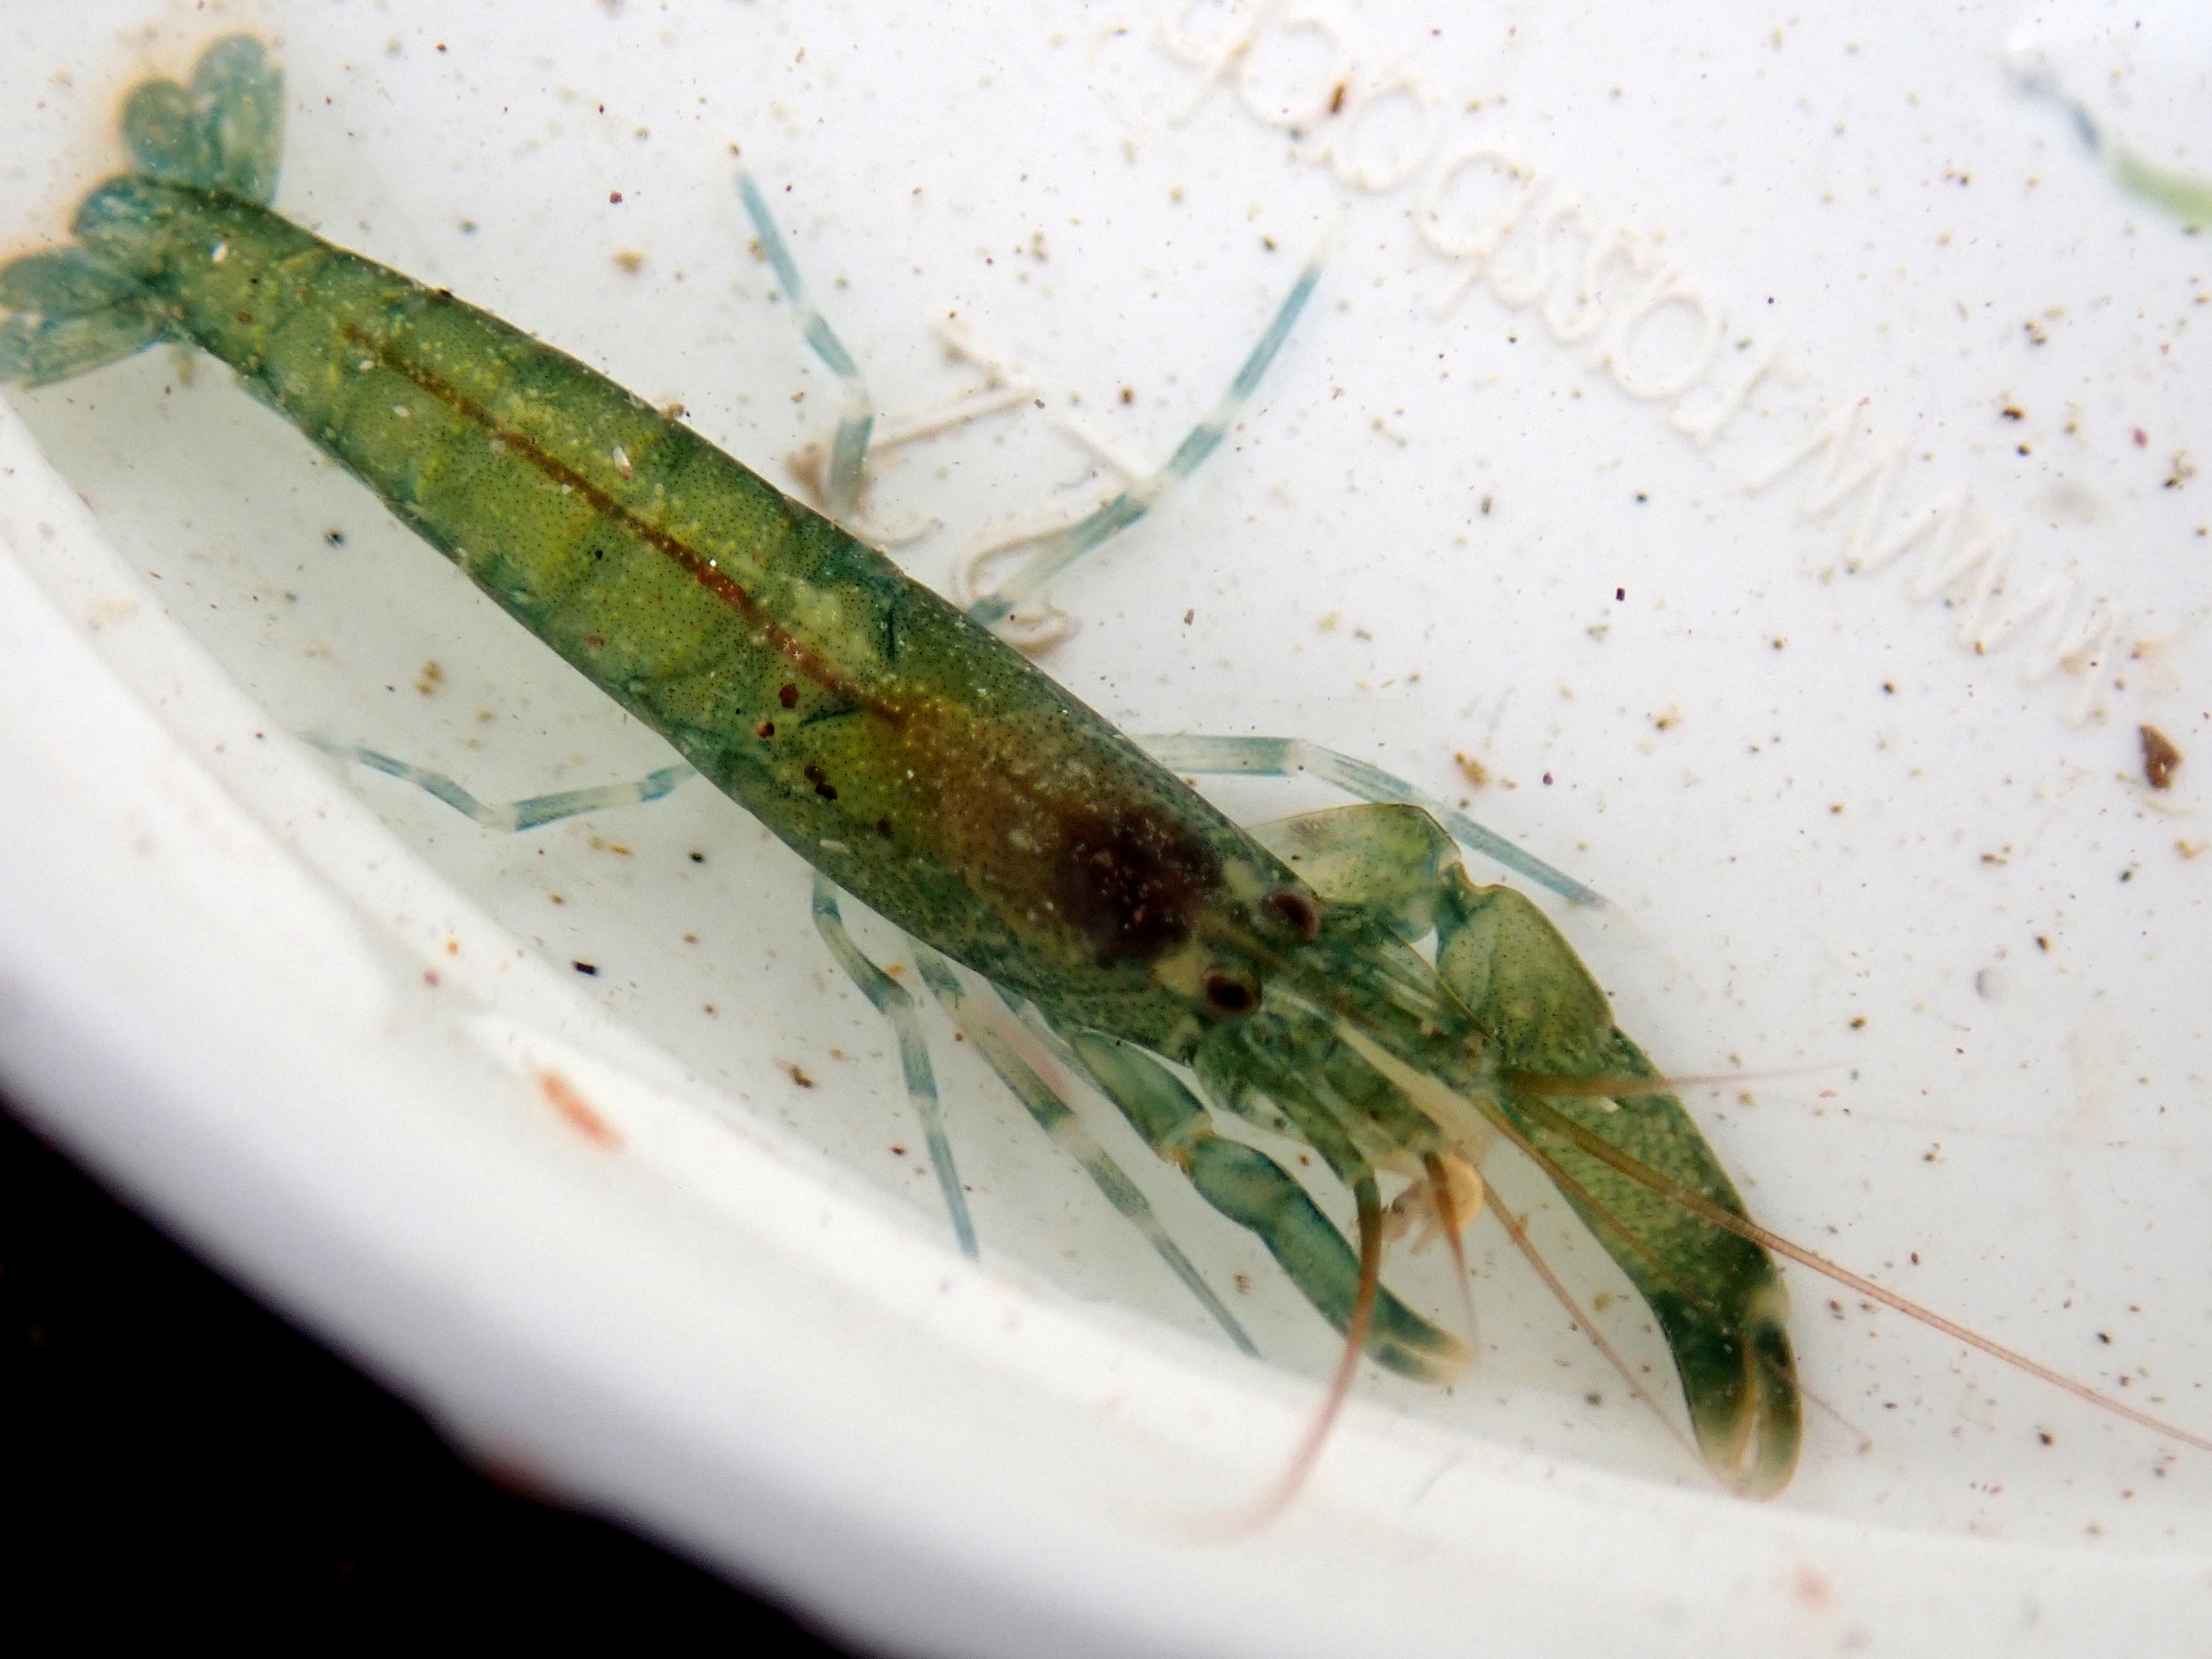 On the way to the shore we found this vivid green prawn with a huge left claw - at first we thought it might be a snapping prawn, but it turned out to be an unusual colour variant of the more familiar hooded shrimp.